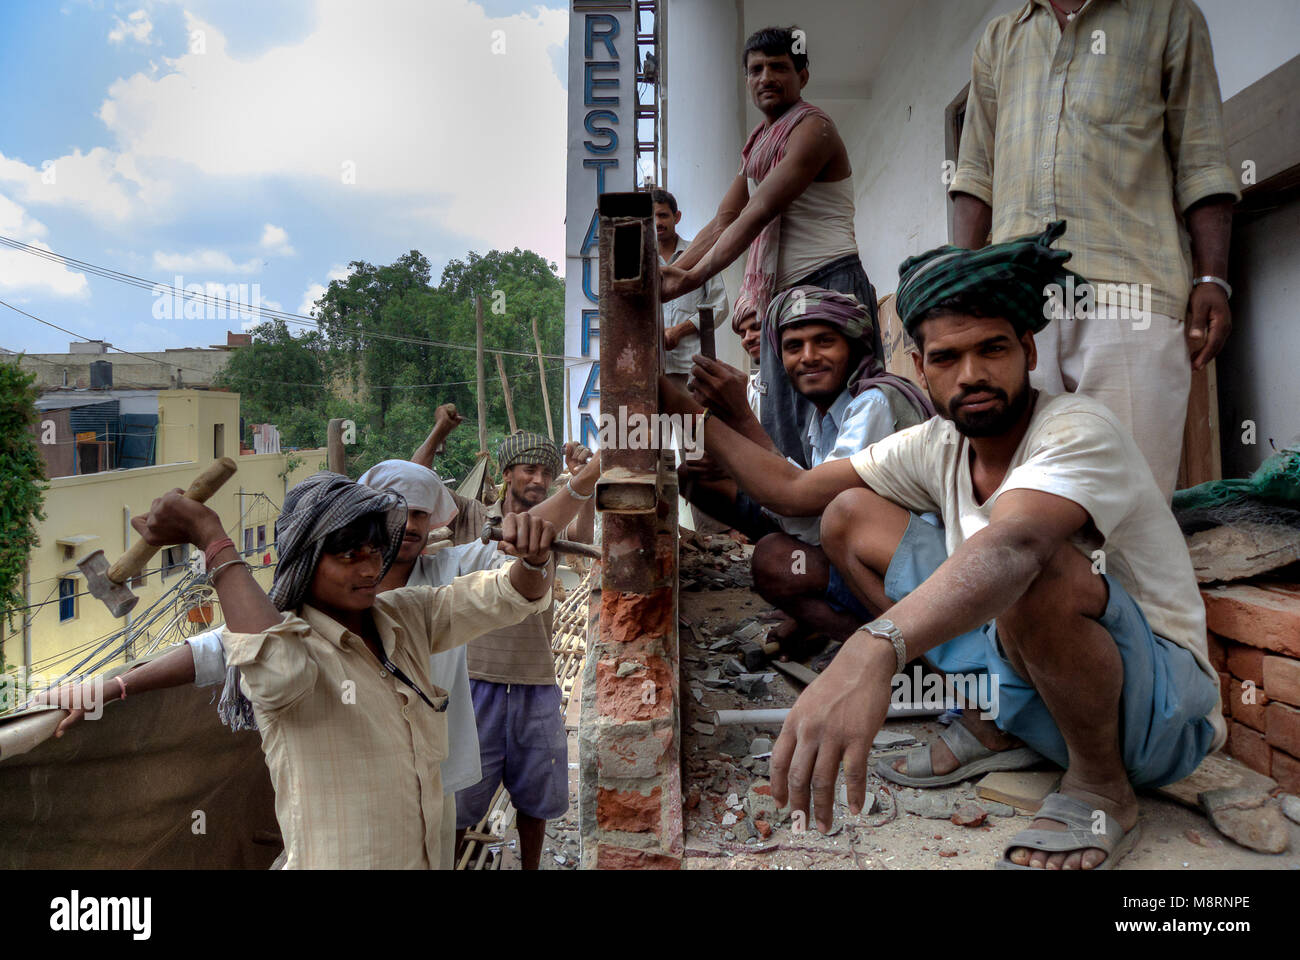 New Delhi, India: a team of bricklayers working on the renovation of a building in New Delhi Stock Photo